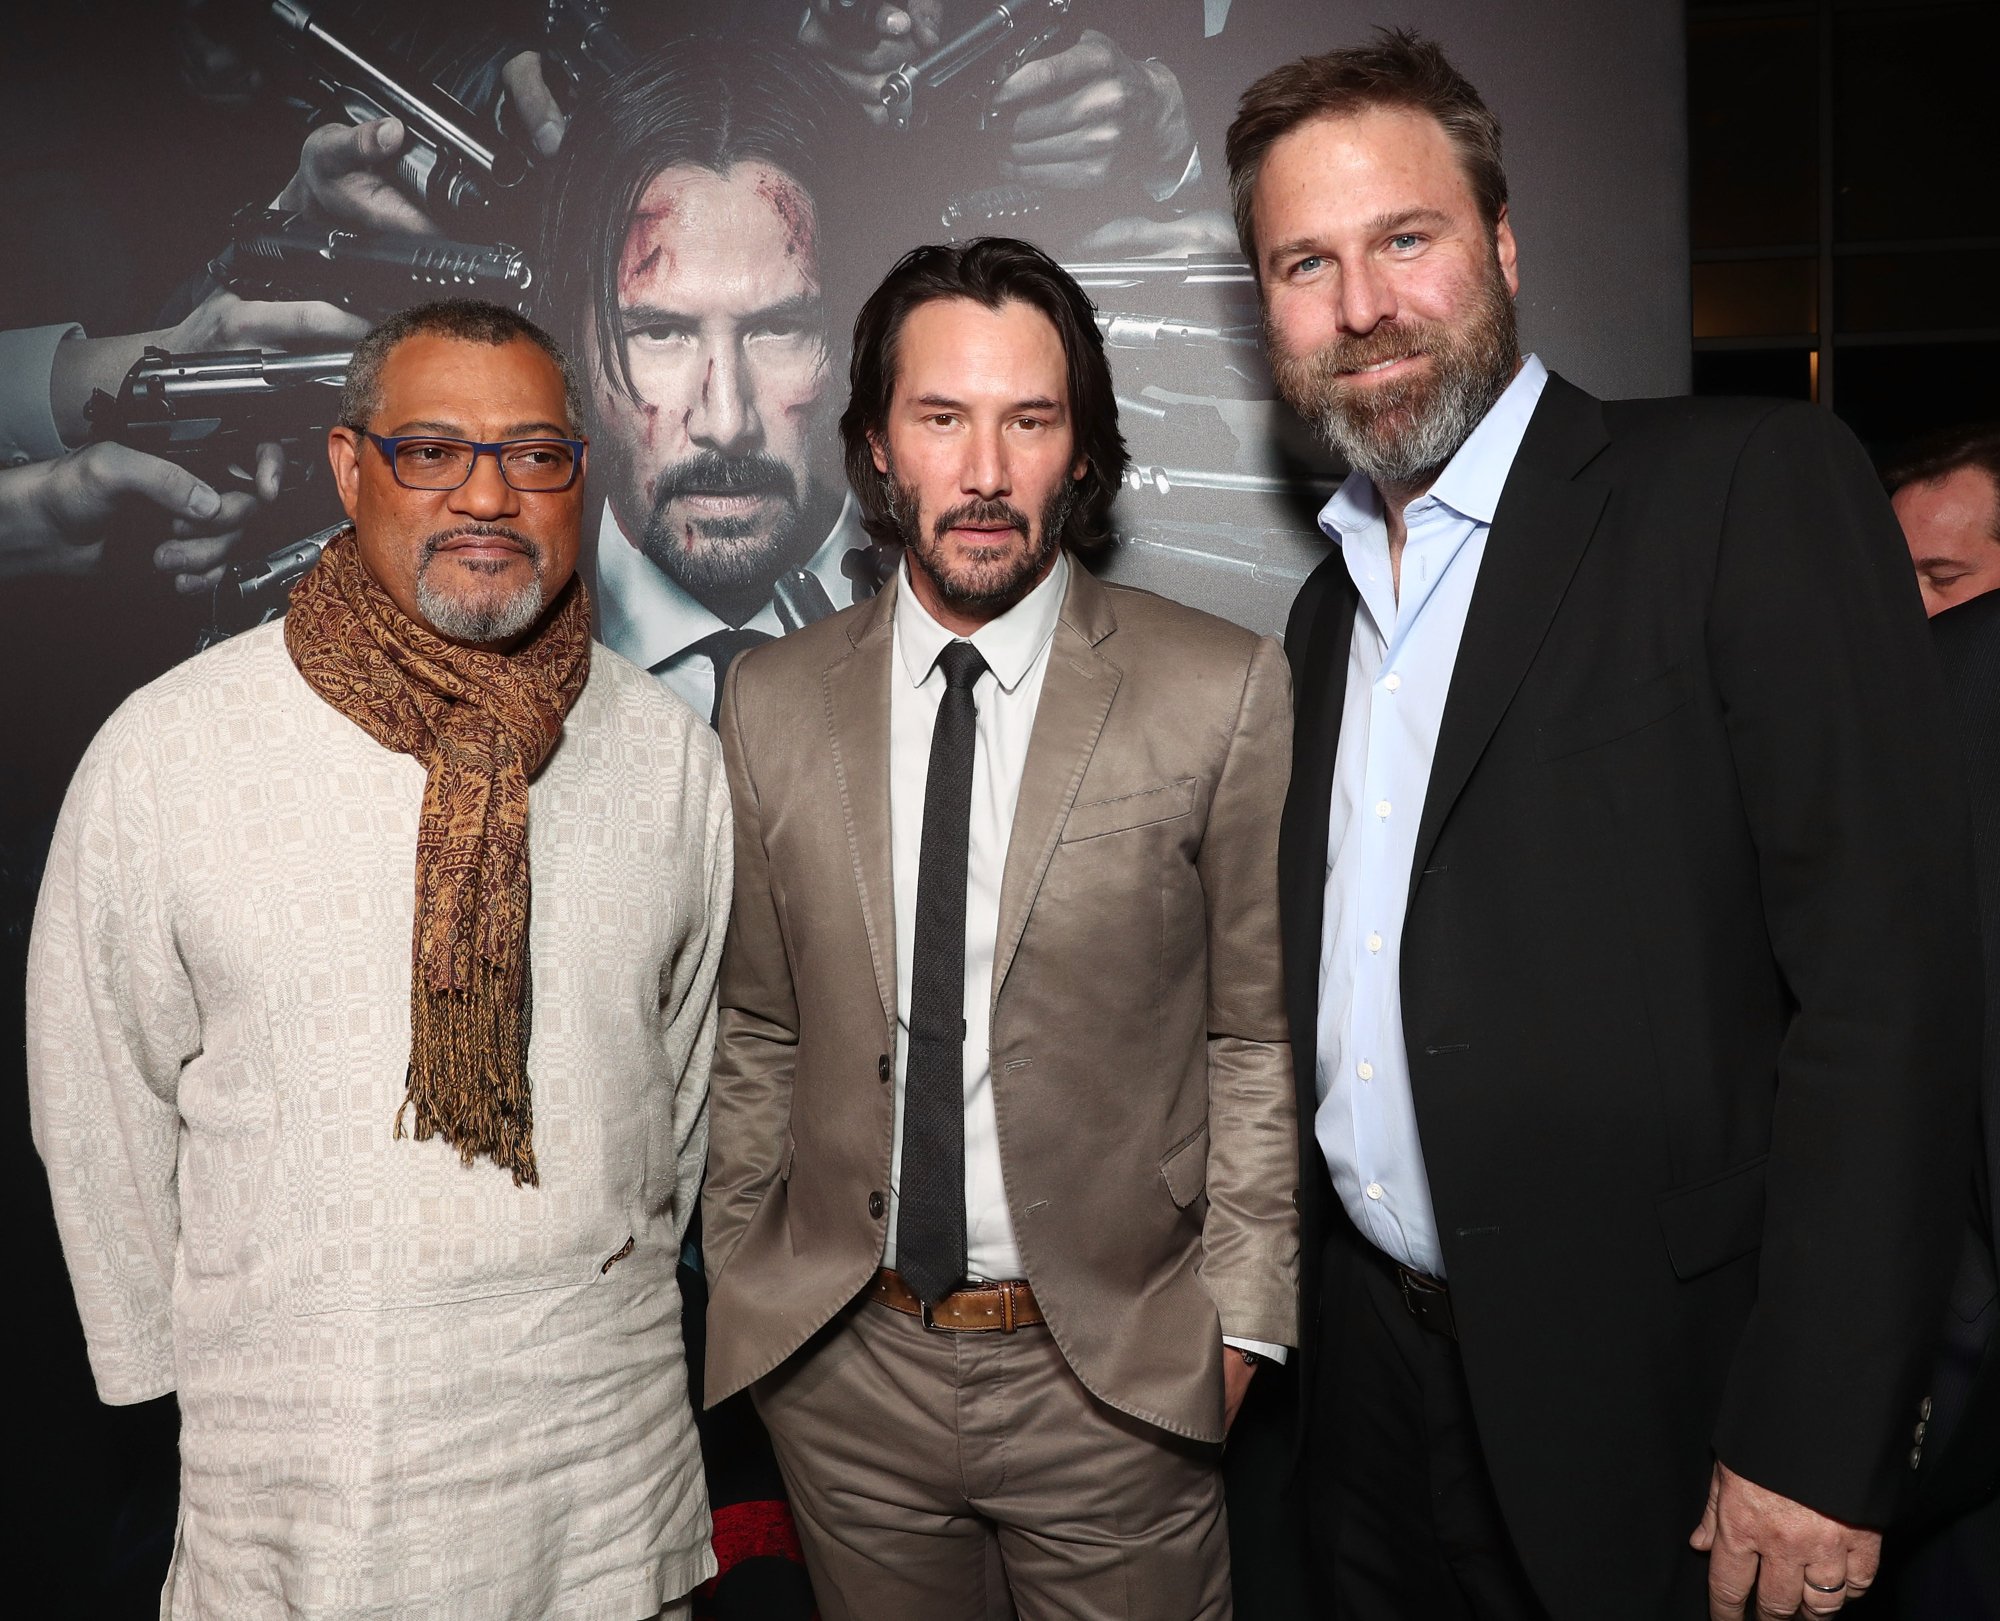 'John Wick 4' movie producer Basil Iwanyk and actors Laurence Fishburne and Keanu Reeves wearing suits in front of 'John Wick 2' poster